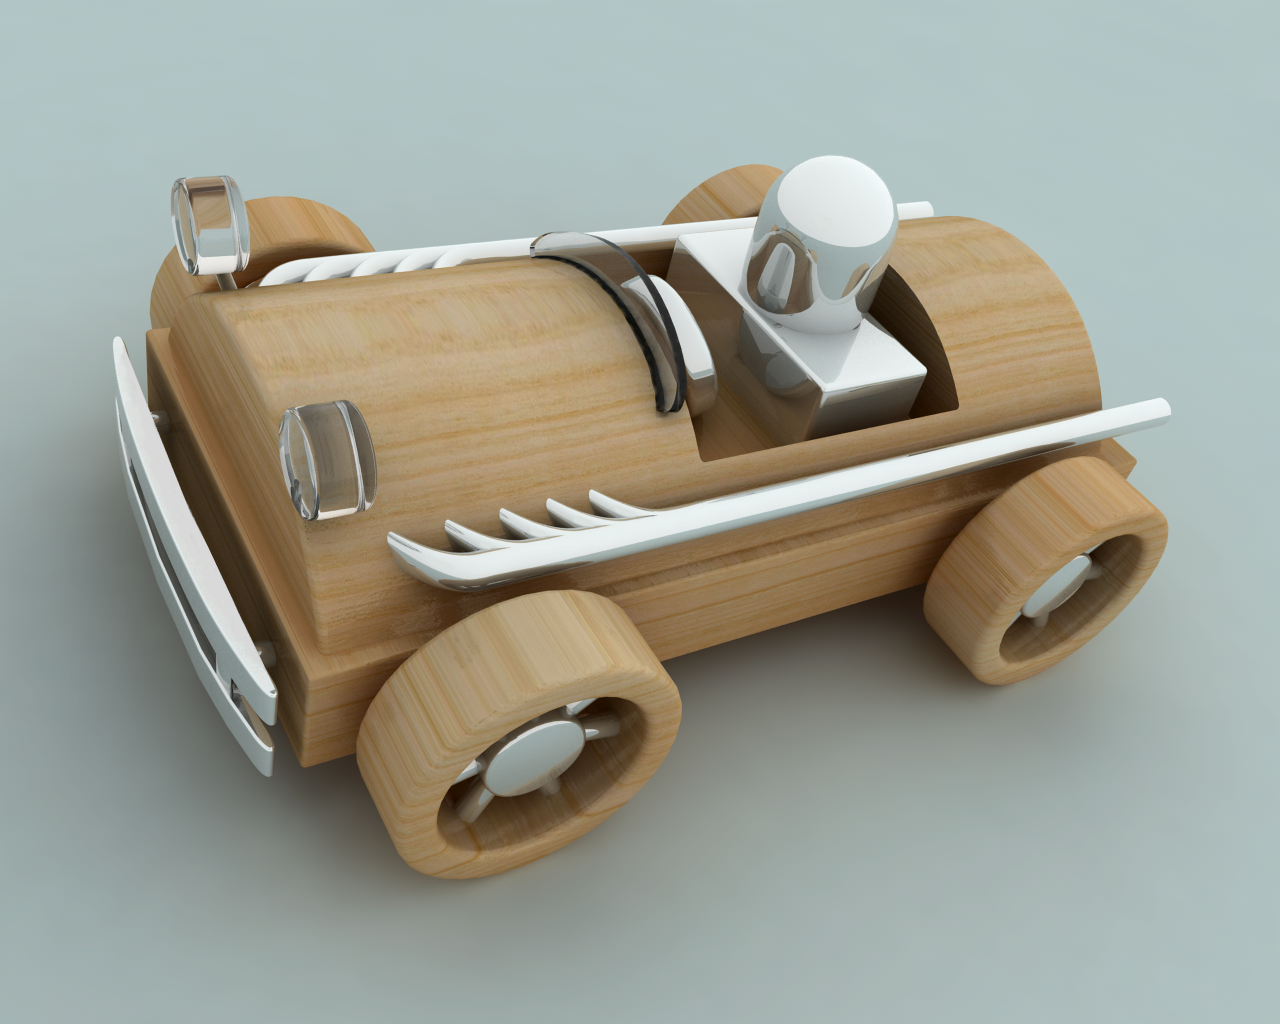 Wooden Toy Car for Print by drawzerRB on DeviantArt